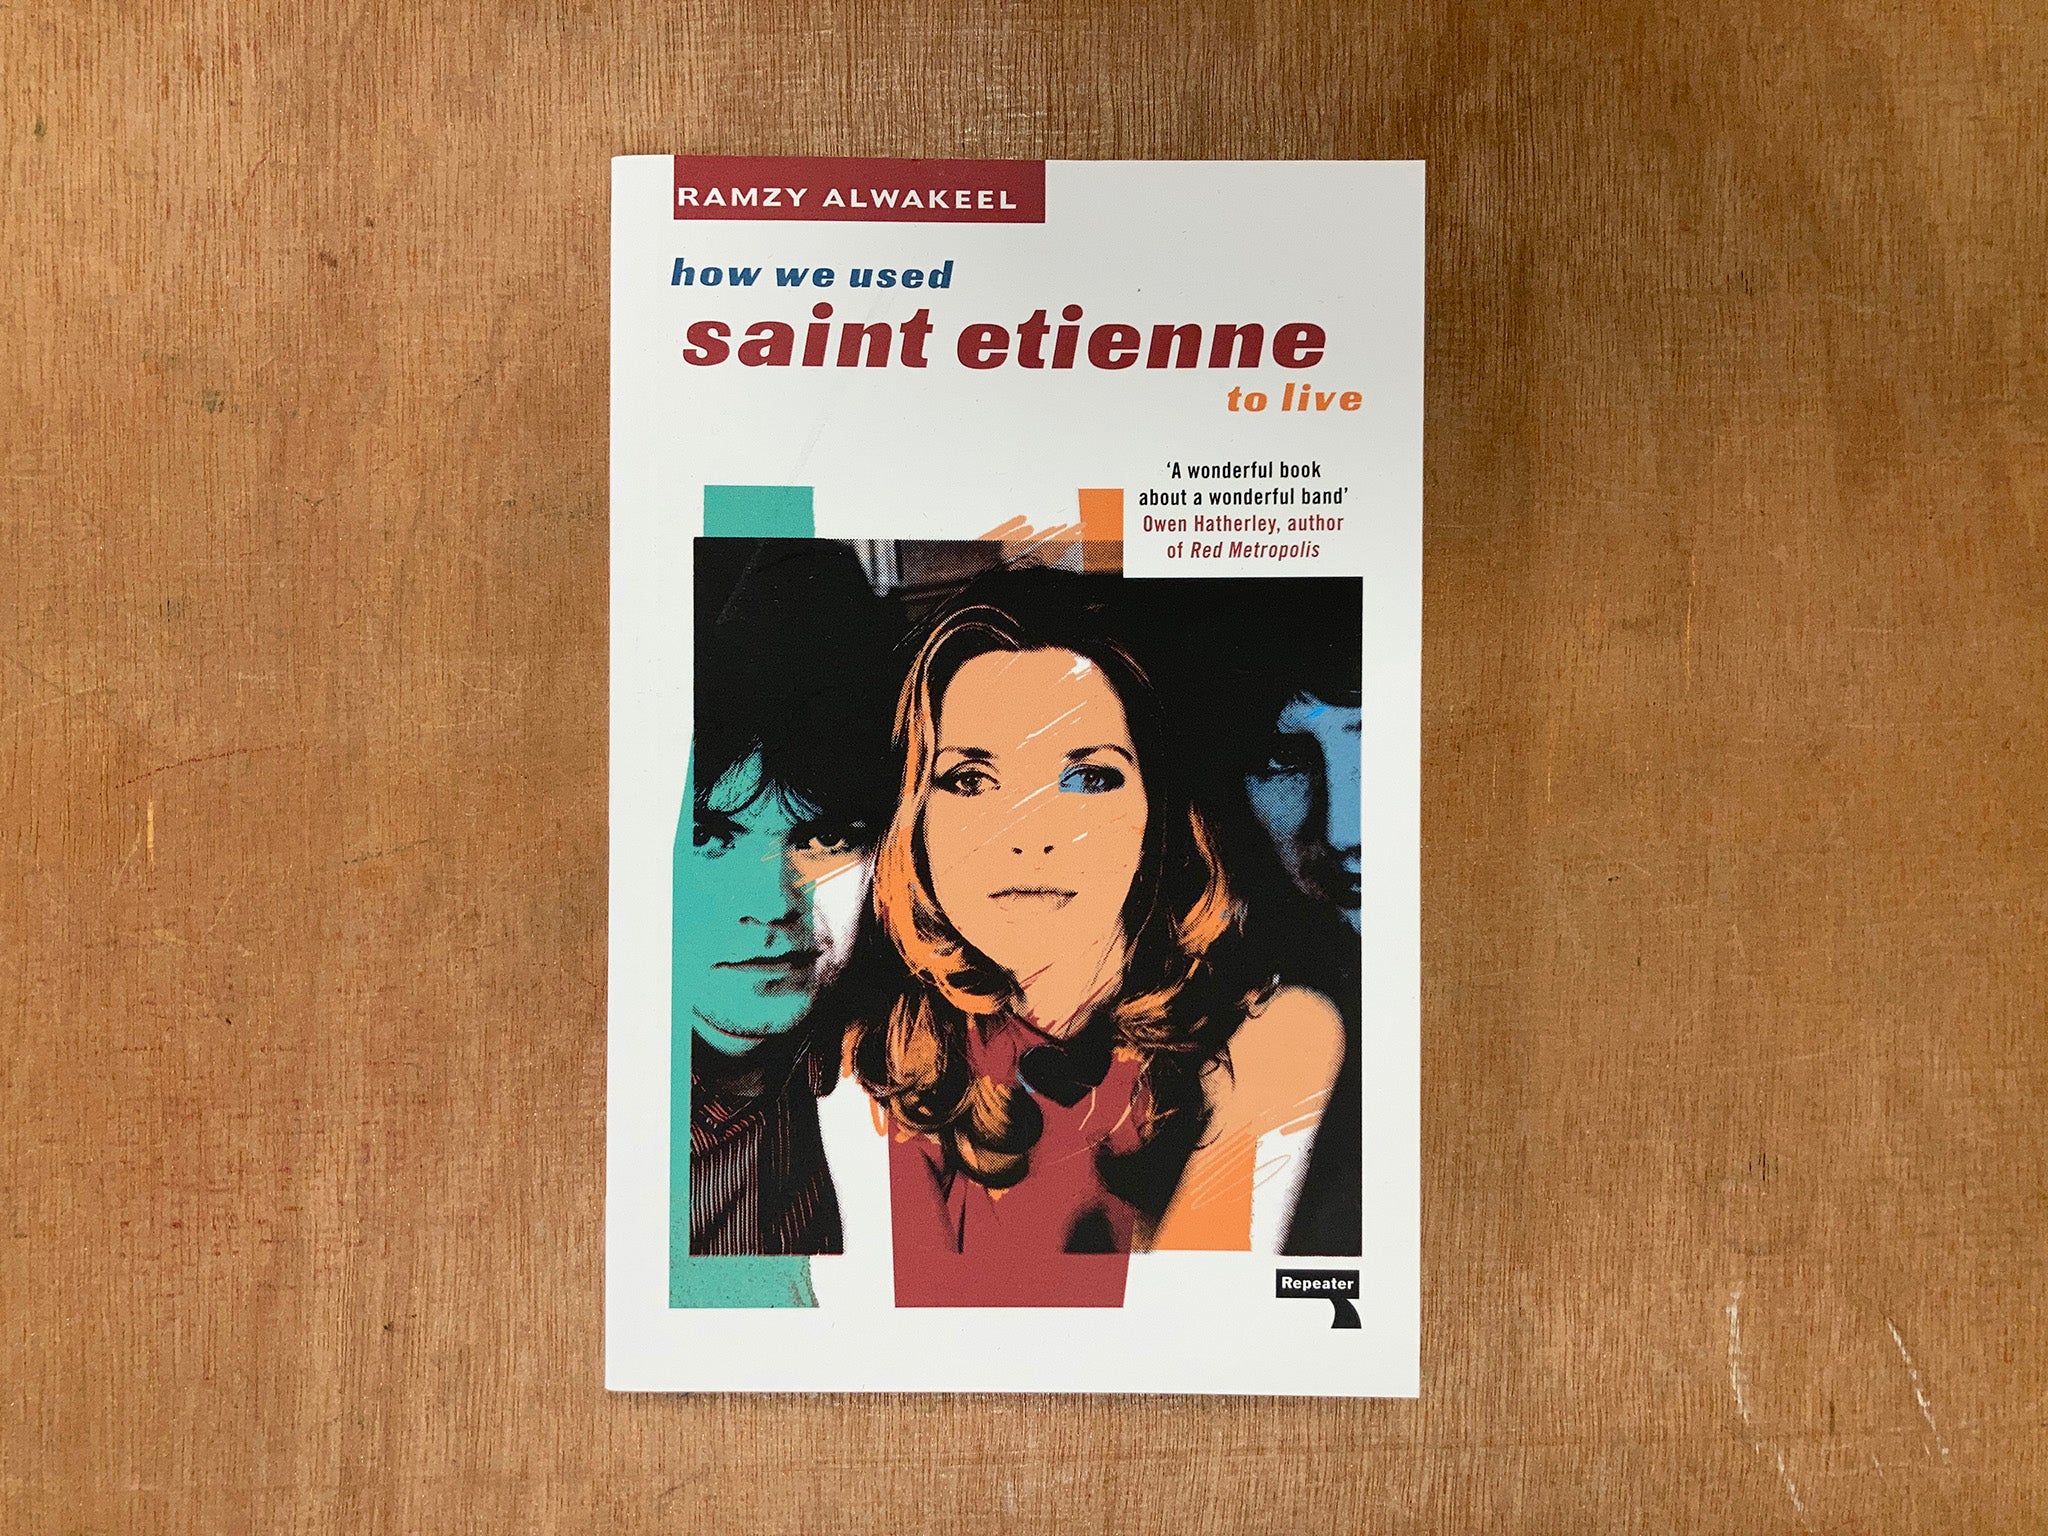 HOW WE USED SAINT ETIENNE TO LIVE by Ramzy Alwakeel